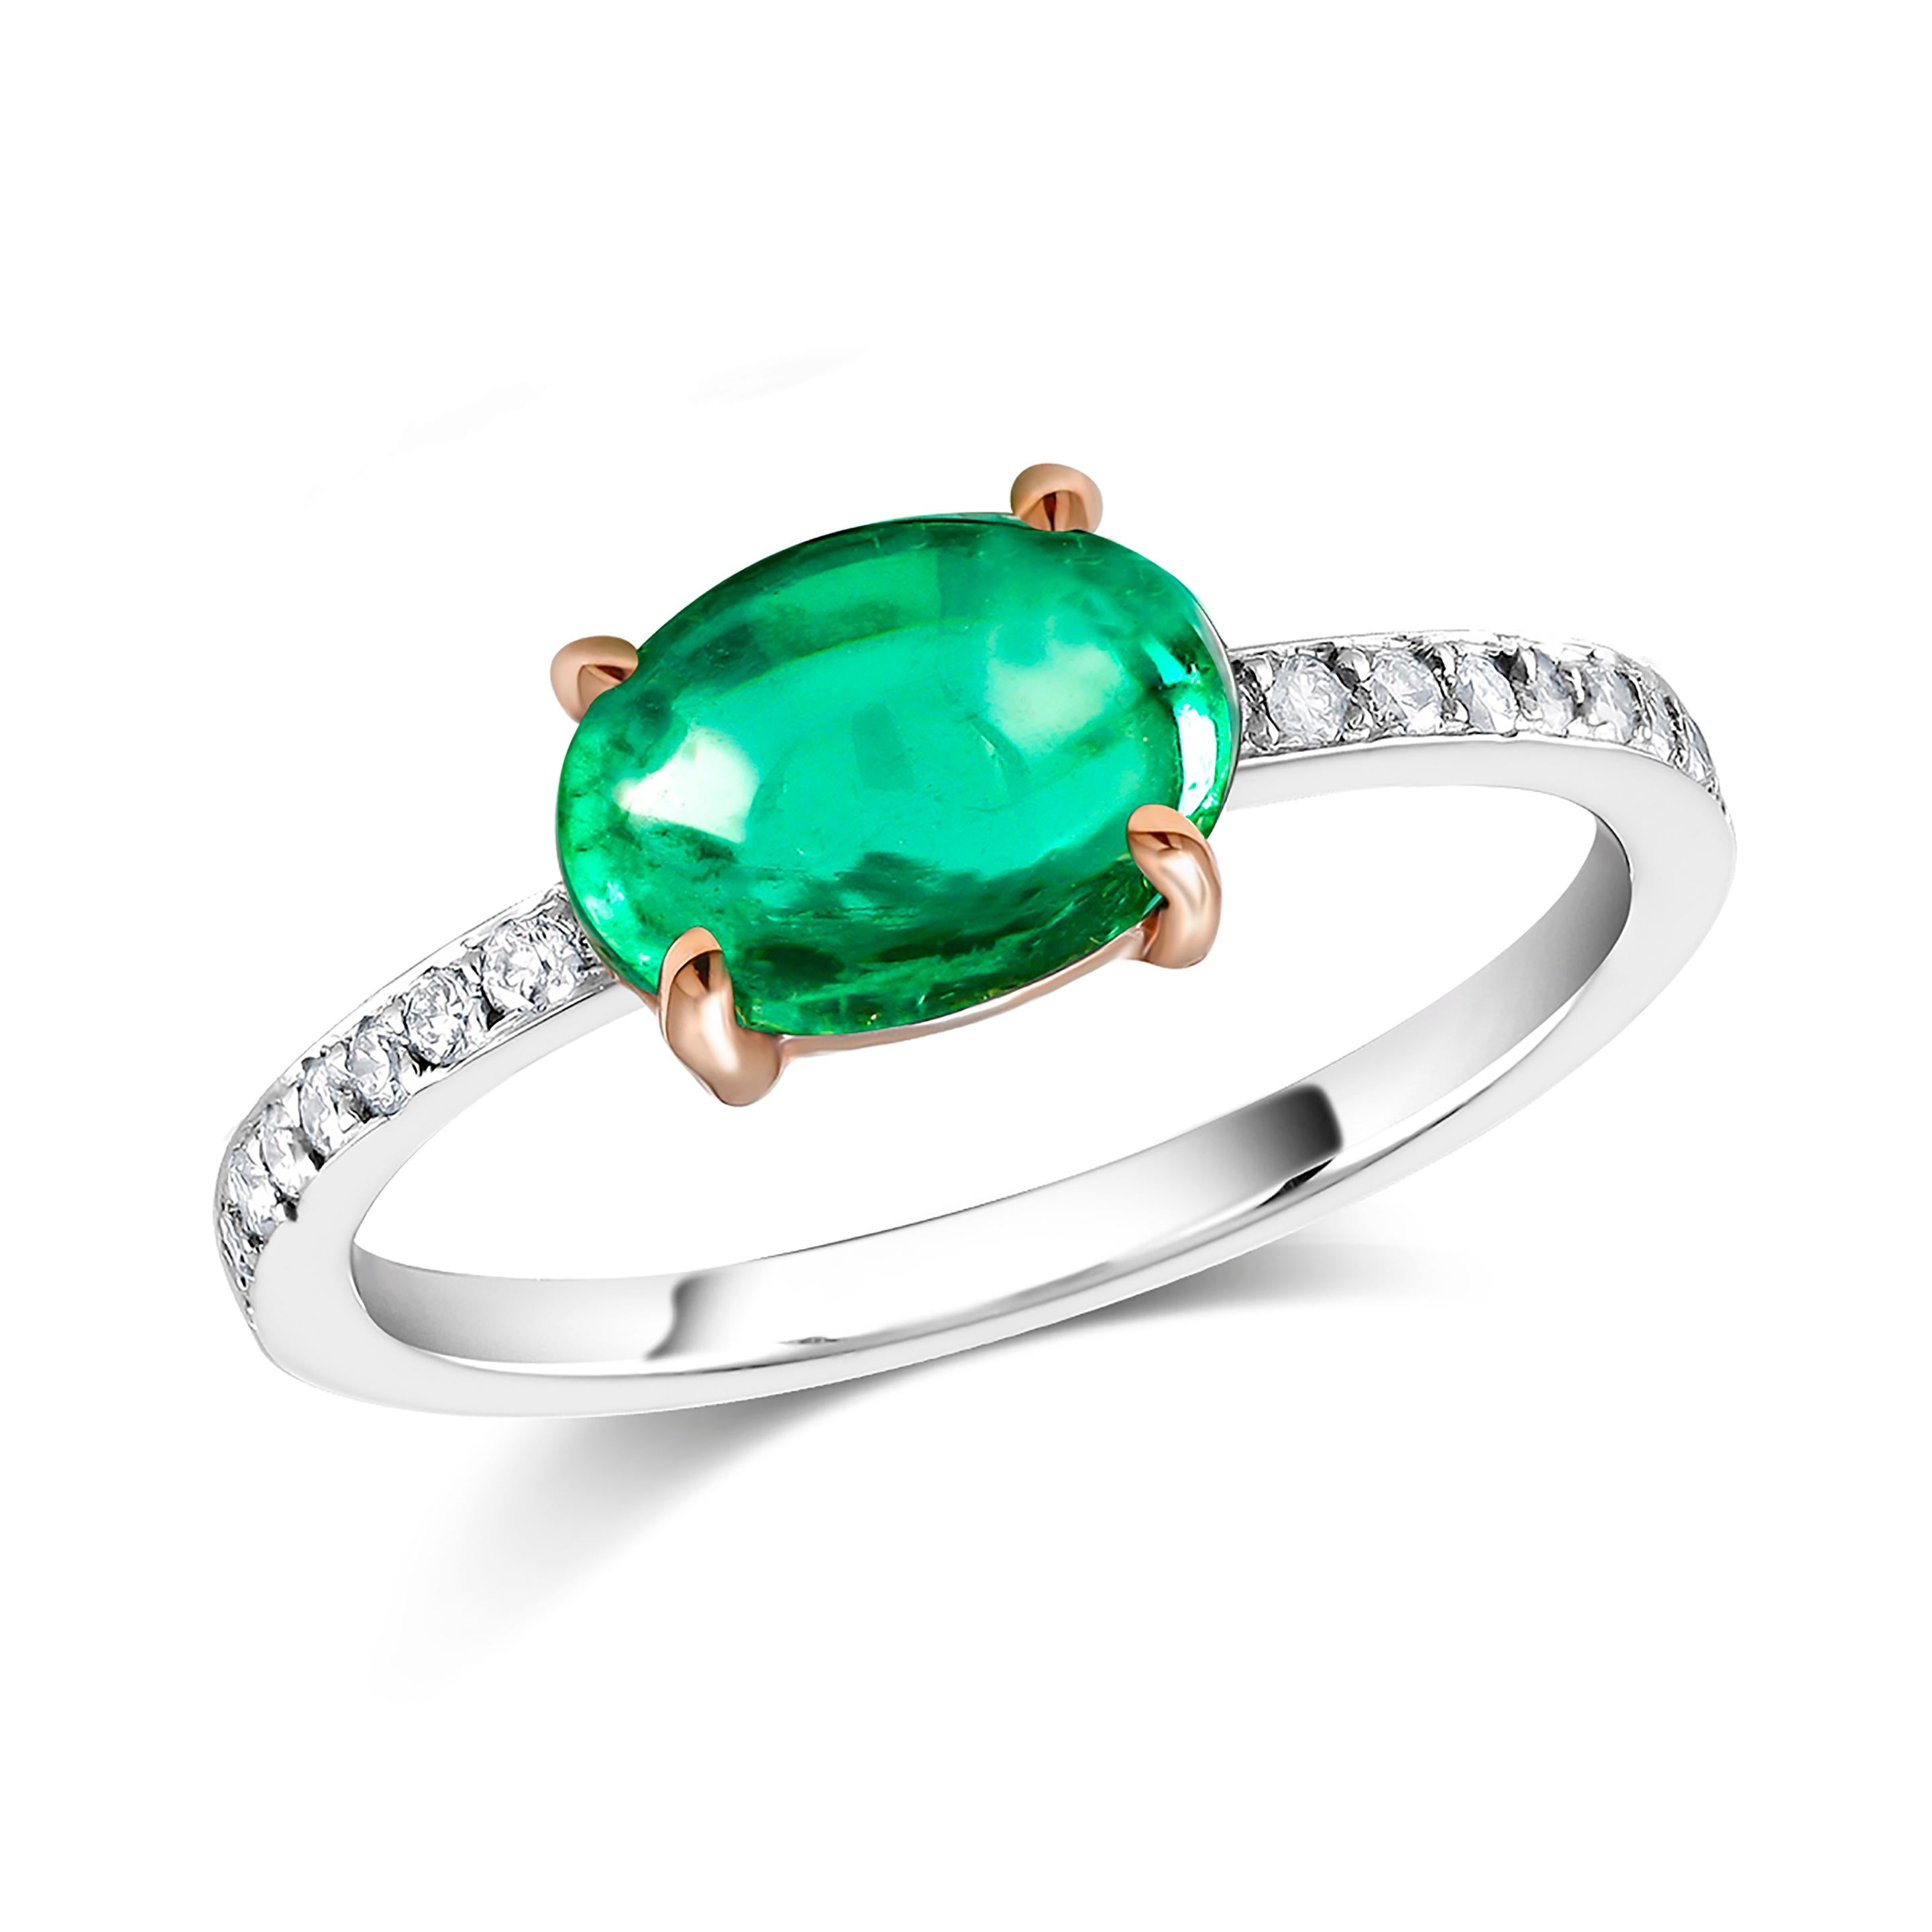 Women's OGI Cabochon Emerald and Diamond Gold Cocktail Ring